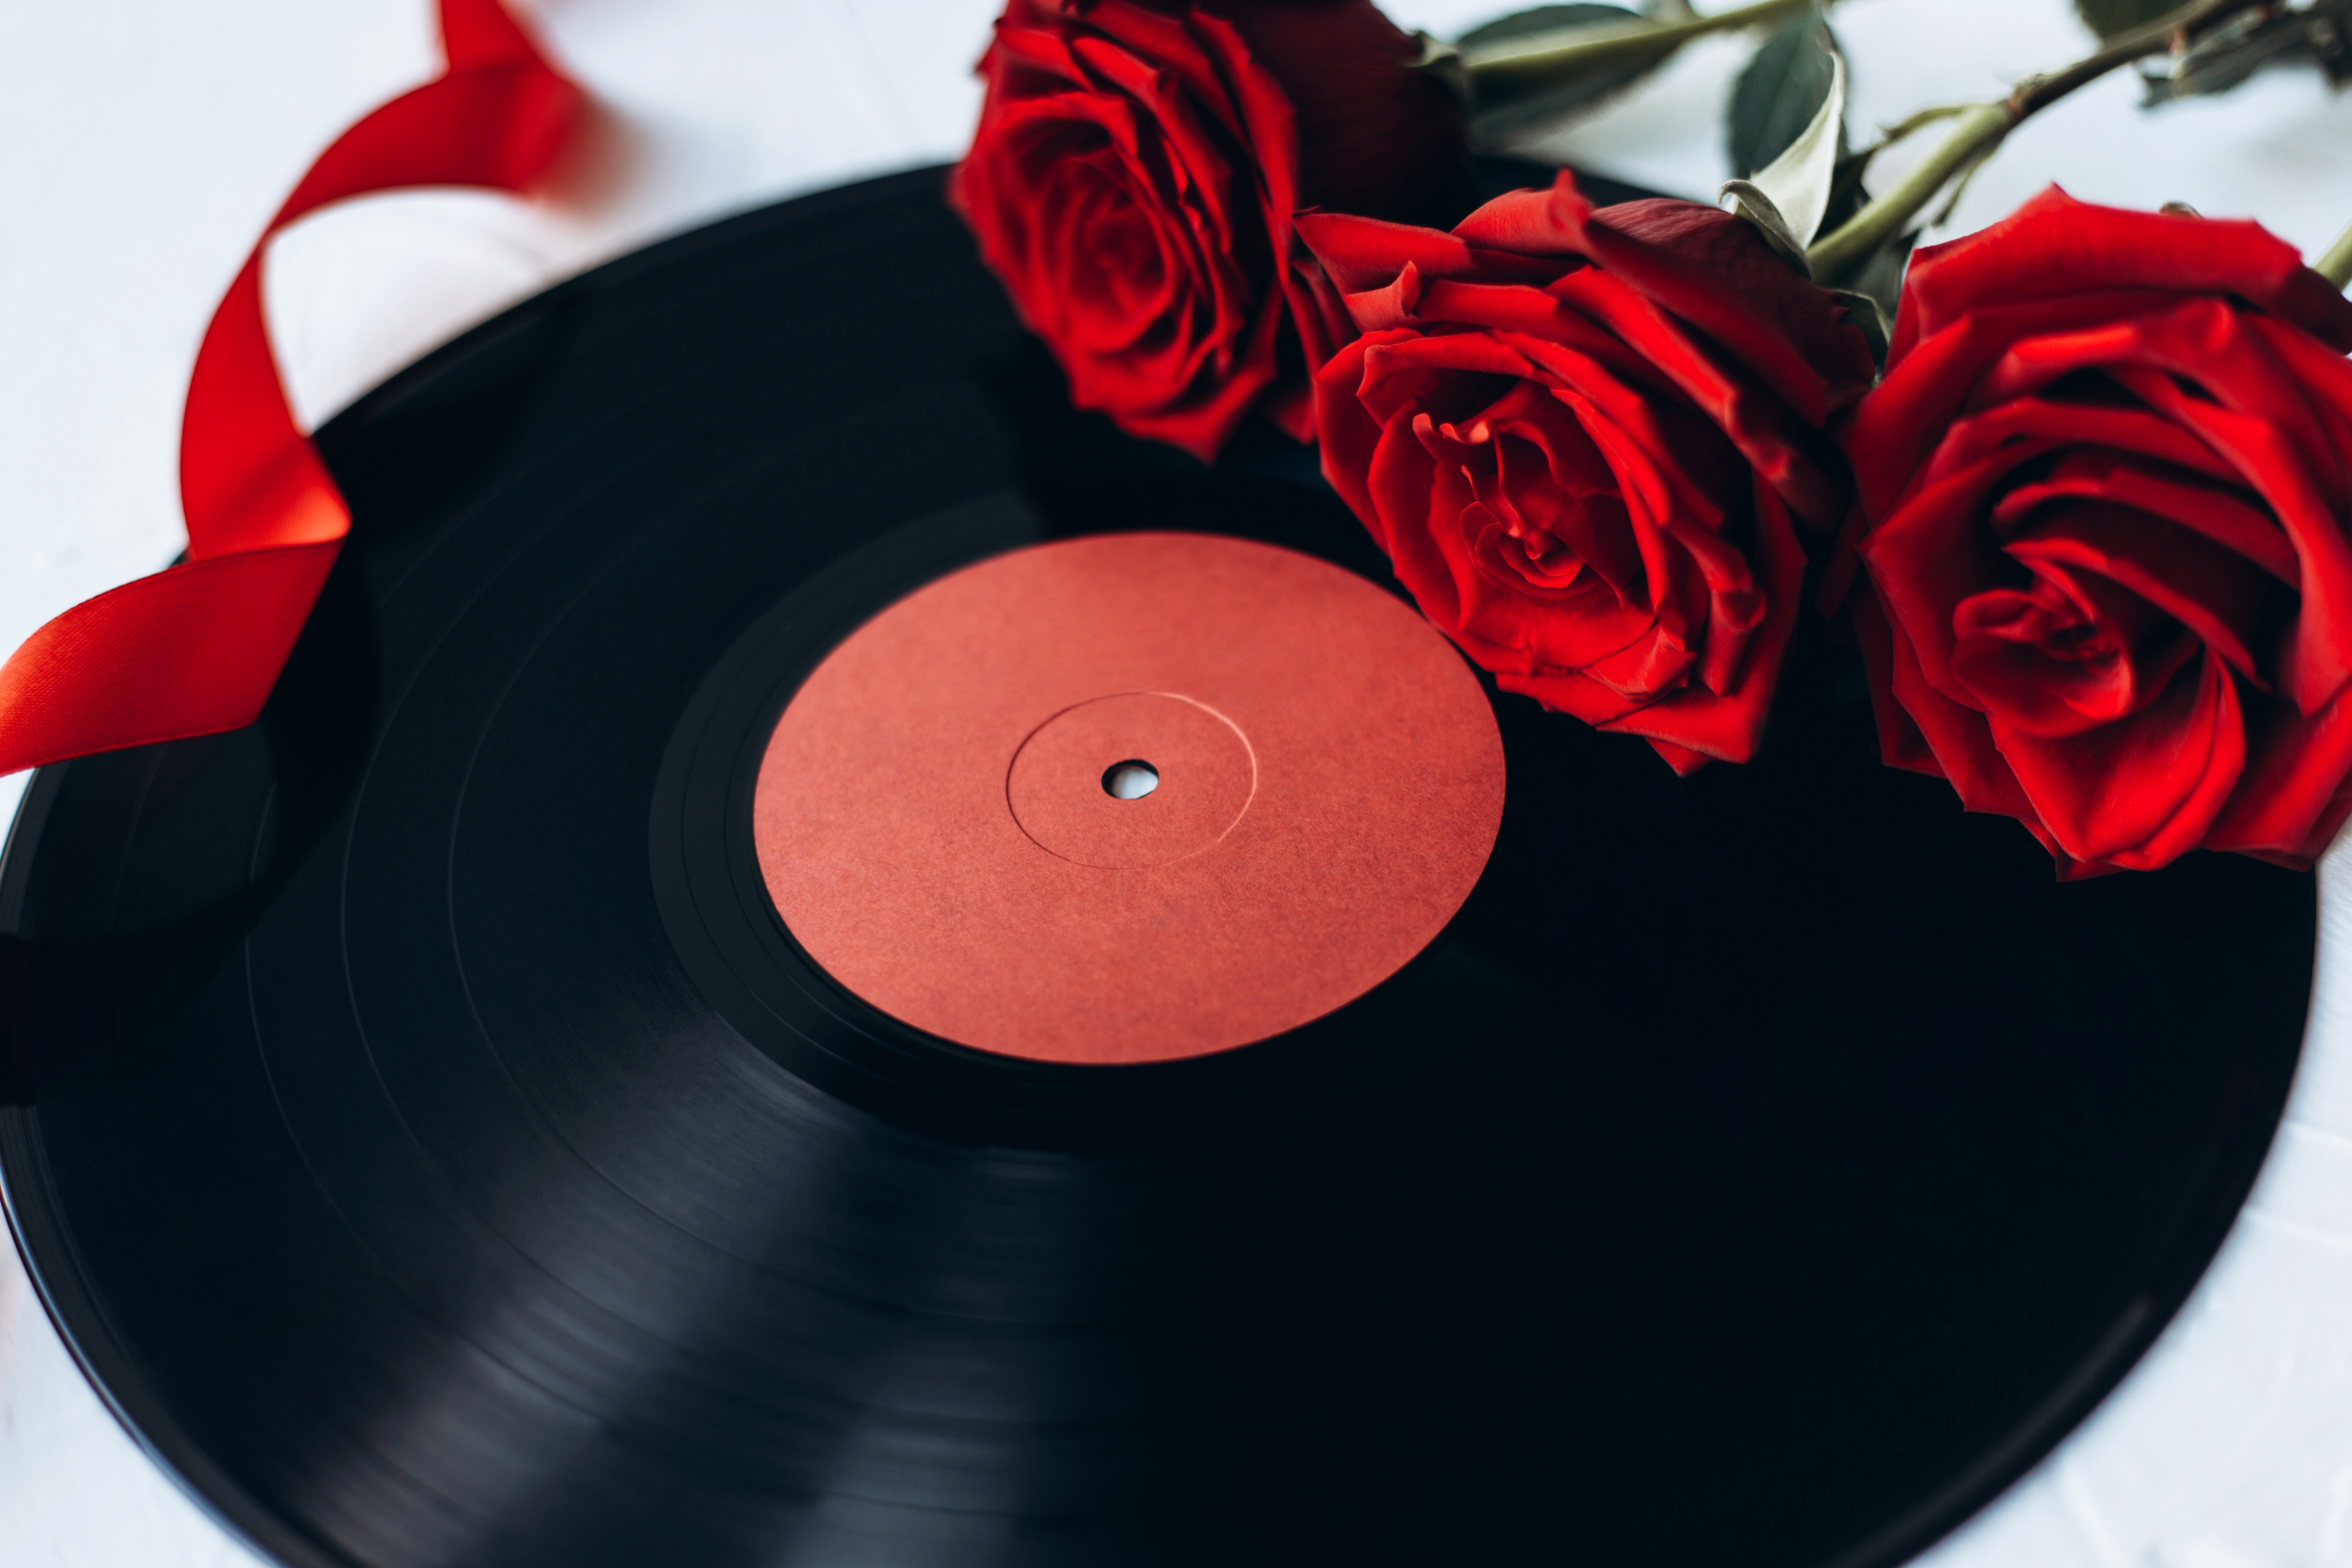 55 Best Valentine's Day Songs to Play for Your Sweetheart